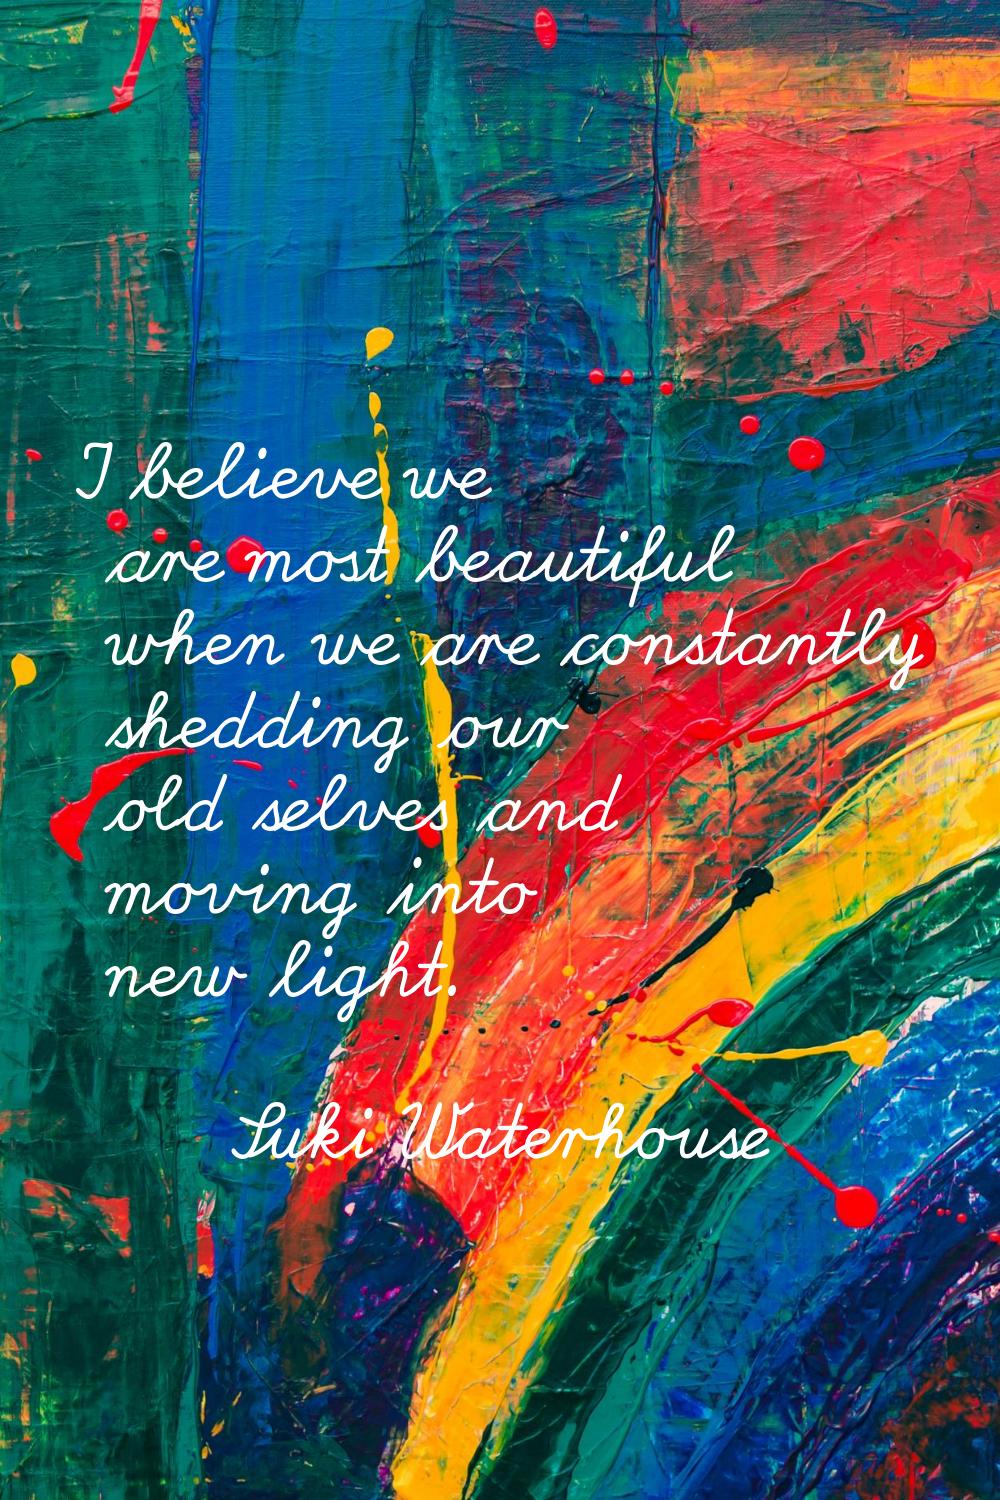 I believe we are most beautiful when we are constantly shedding our old selves and moving into new 